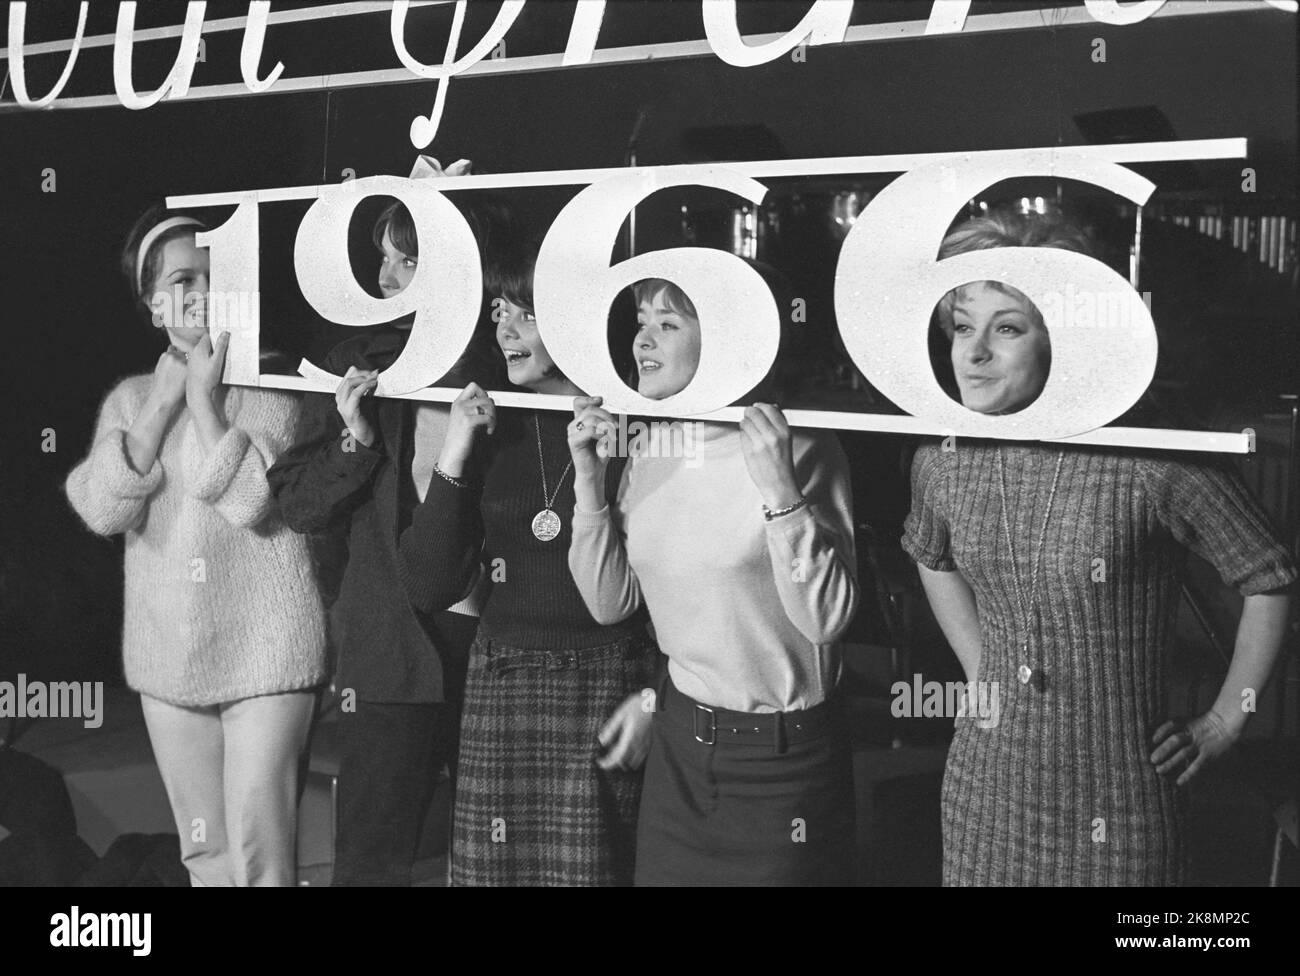 Oslo 19660205: Participants in the Norwegian Melody Grand Prix competition. From left Anita Thallaug, Åse Kleveland, Wenche Myhre, Kirsti Sparboe and Grynet Molvig. Photo: NTB / NTB Stock Photo